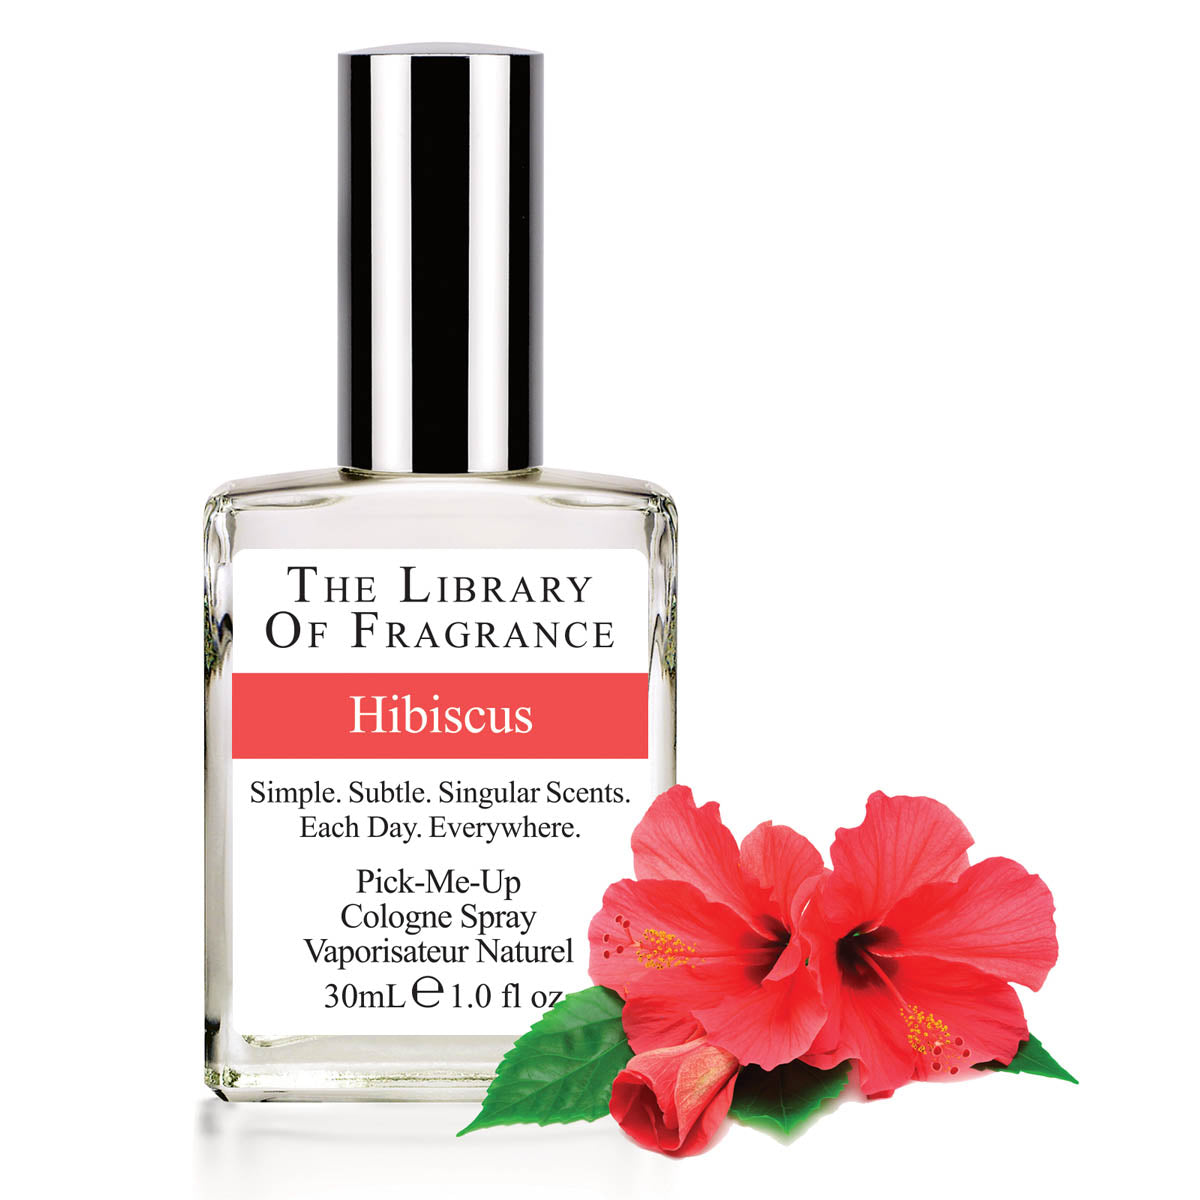 The Library Of Fragrance Hibiscus 30ml Cologne AKA Demeter Fragrance